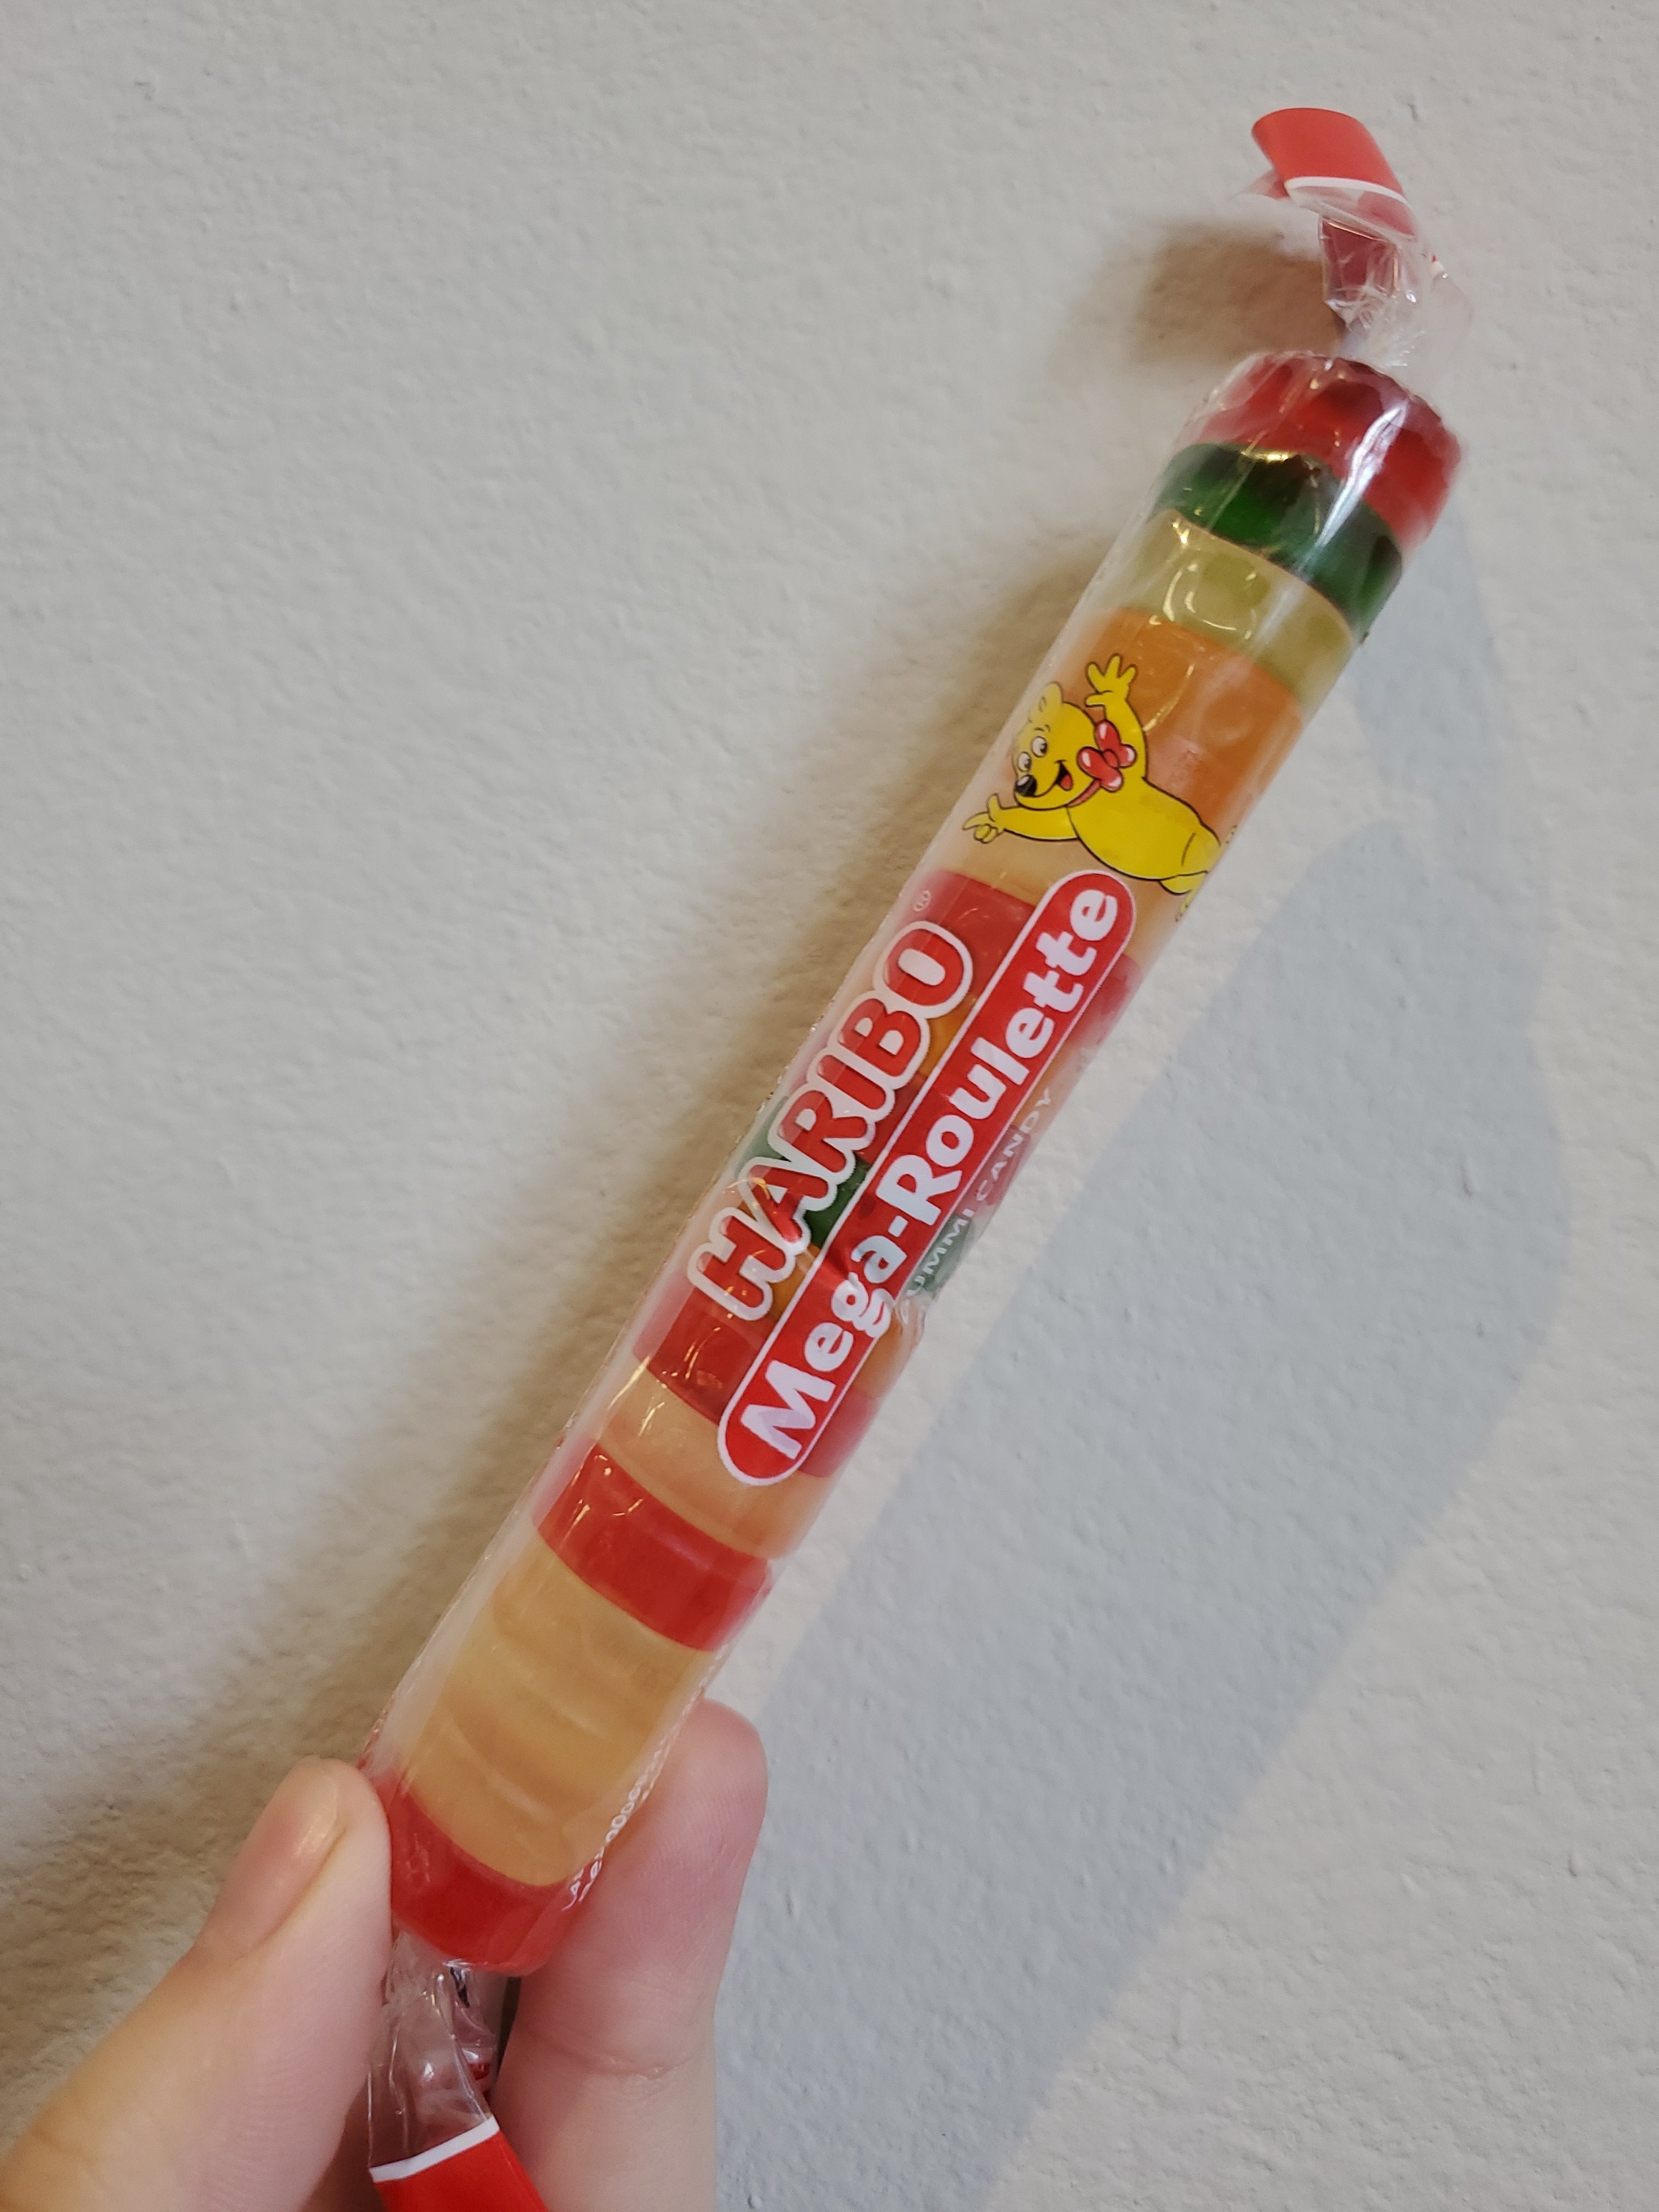 Haribo Roulette Gummi Candy, Gummy Candy